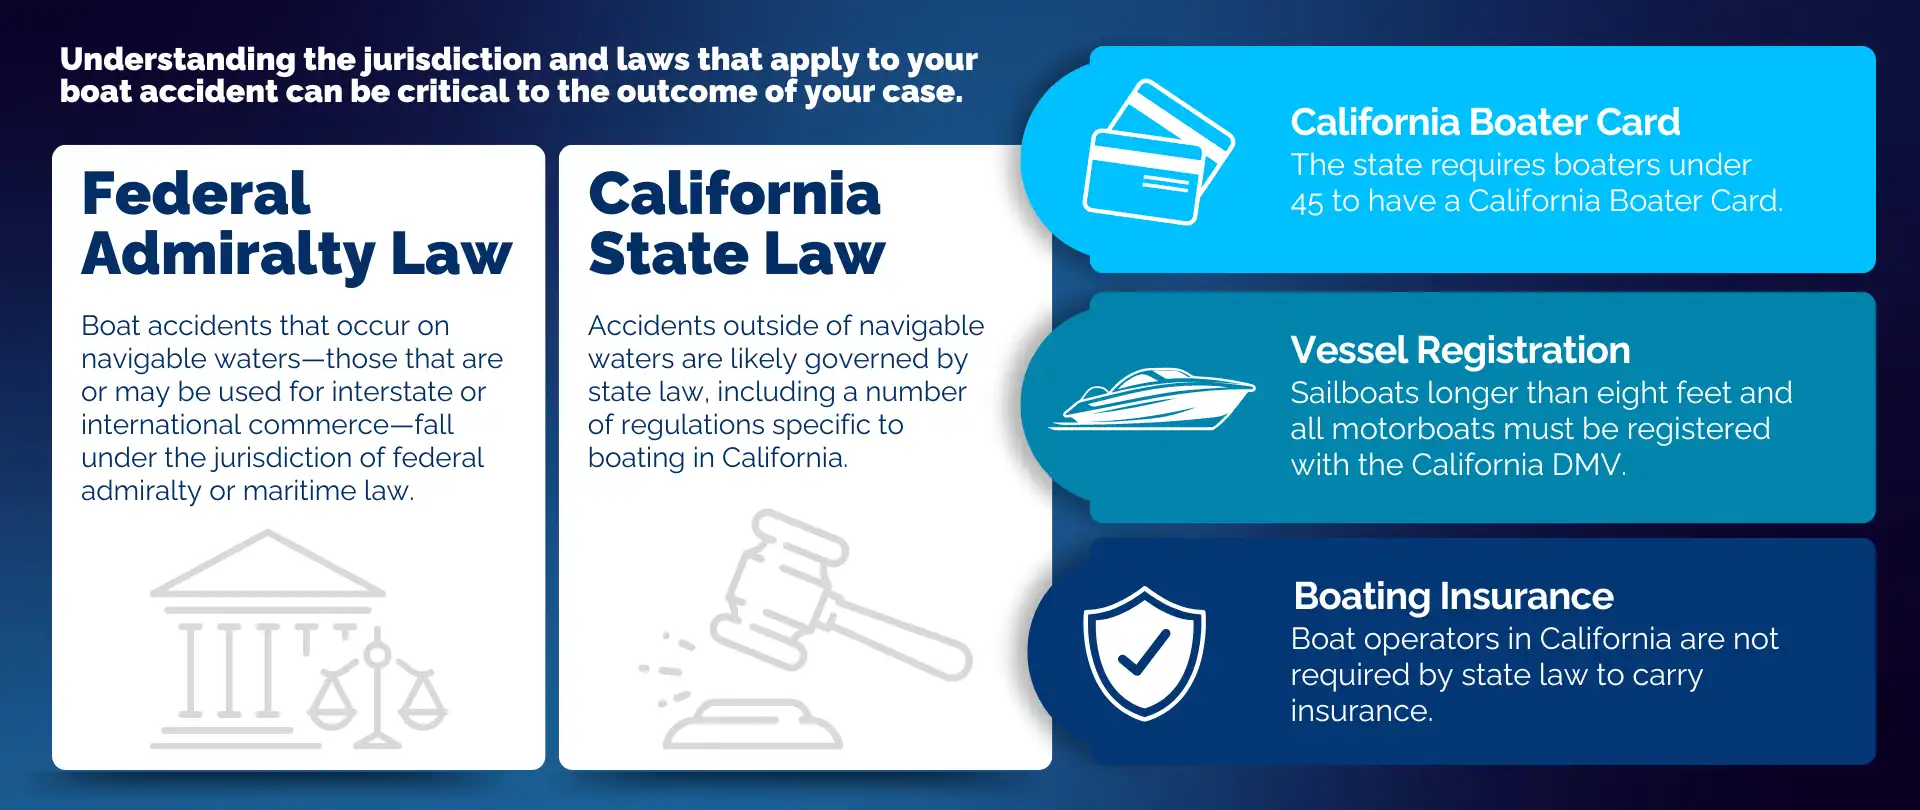 Infographic depicting the laws that apply to boat accidents in California. Items covered include 'Federal Admiralty Law,' 'California State Law,' 'California Boater Cards,' 'Vessel Registration' and 'Boating Insurance'